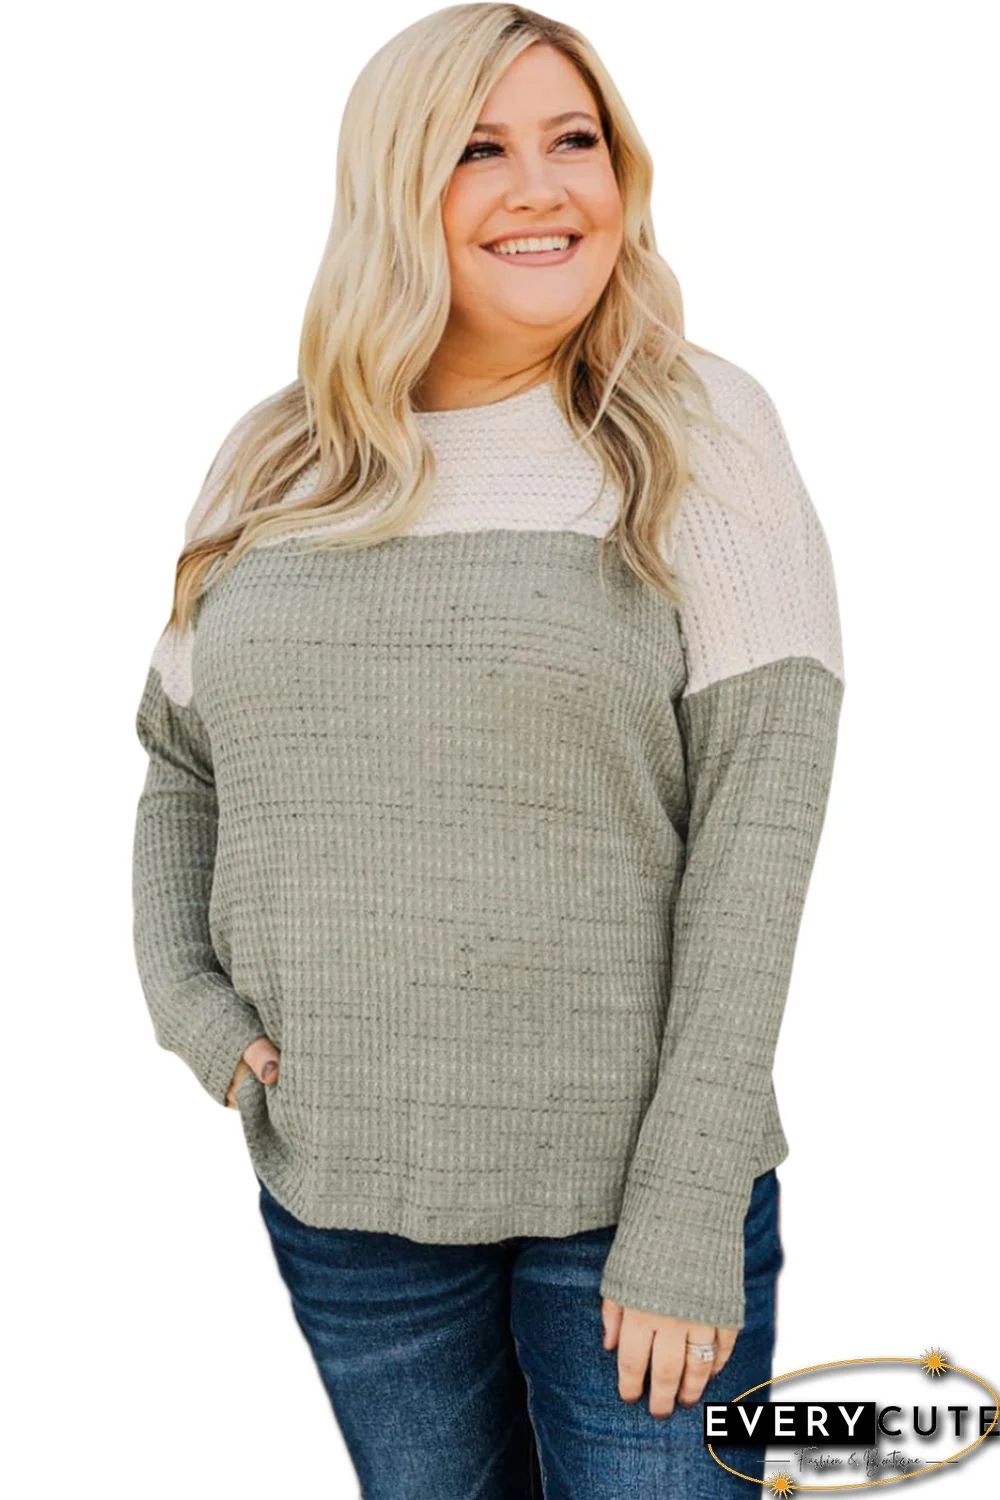 Green Plus Size Colorblock Knit Long Sleeve Top